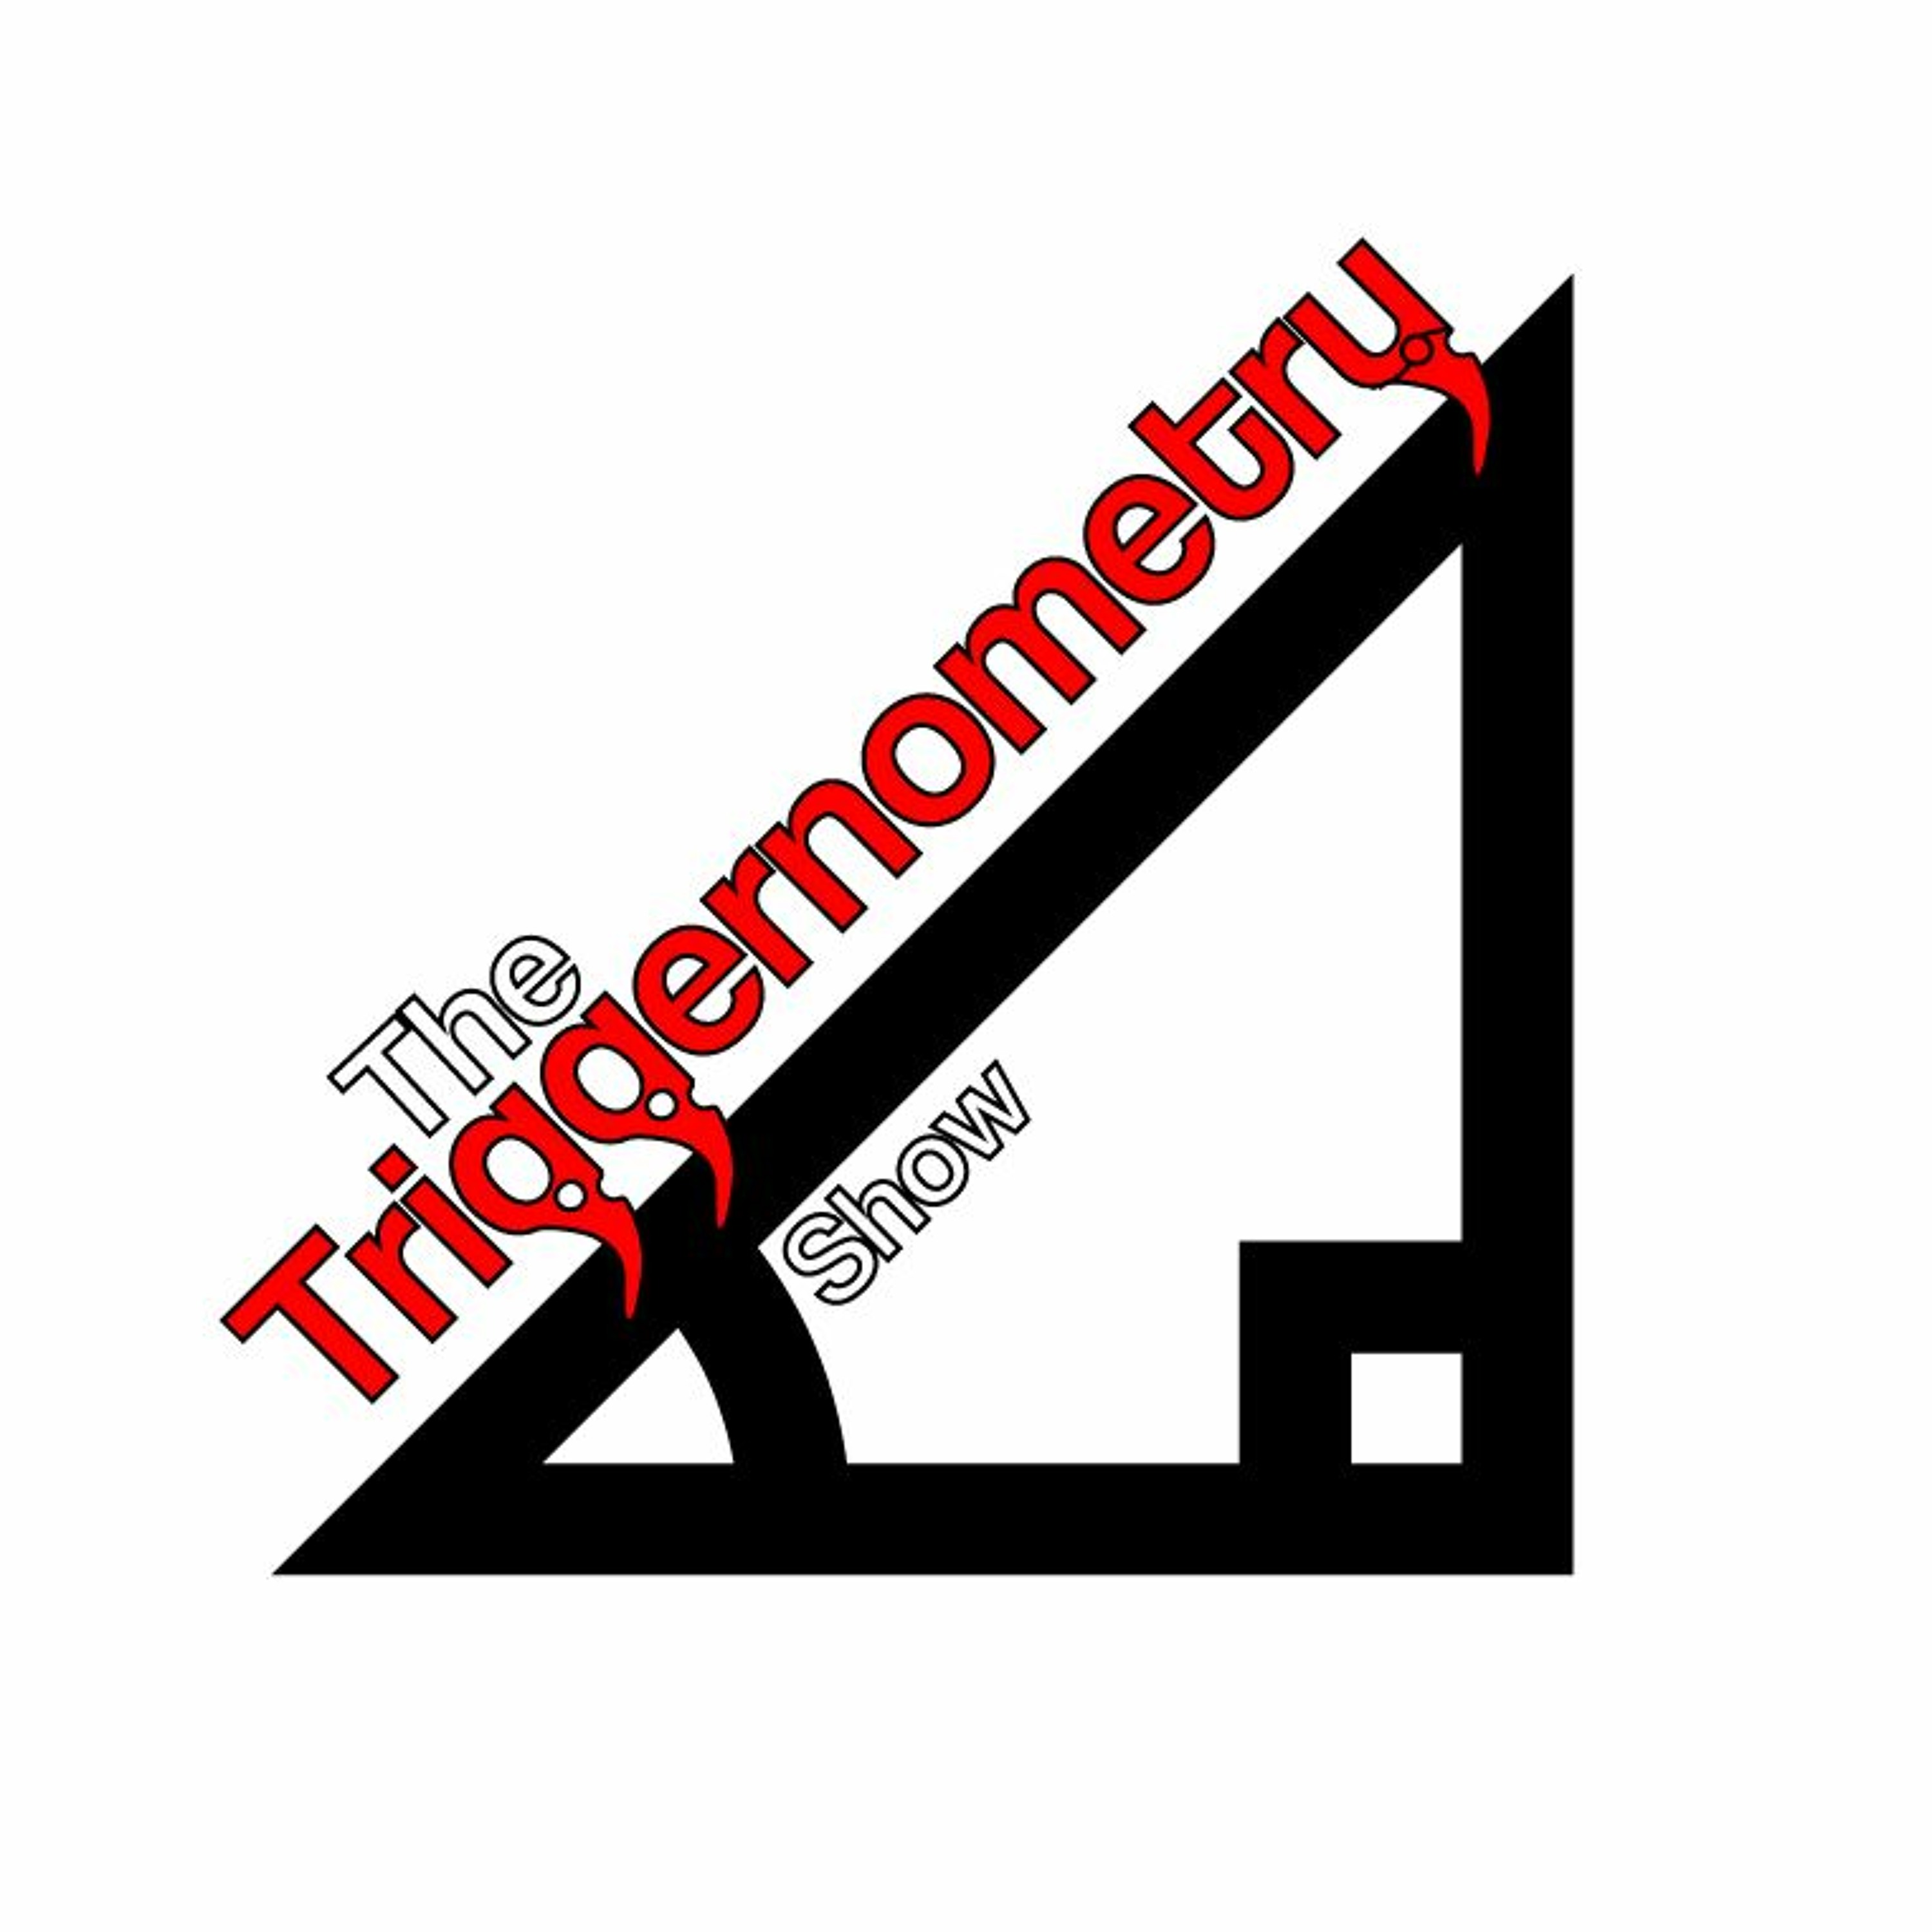 The Triggernometry Show - Dan Hardy pt 2 - The Hybrid and Project X